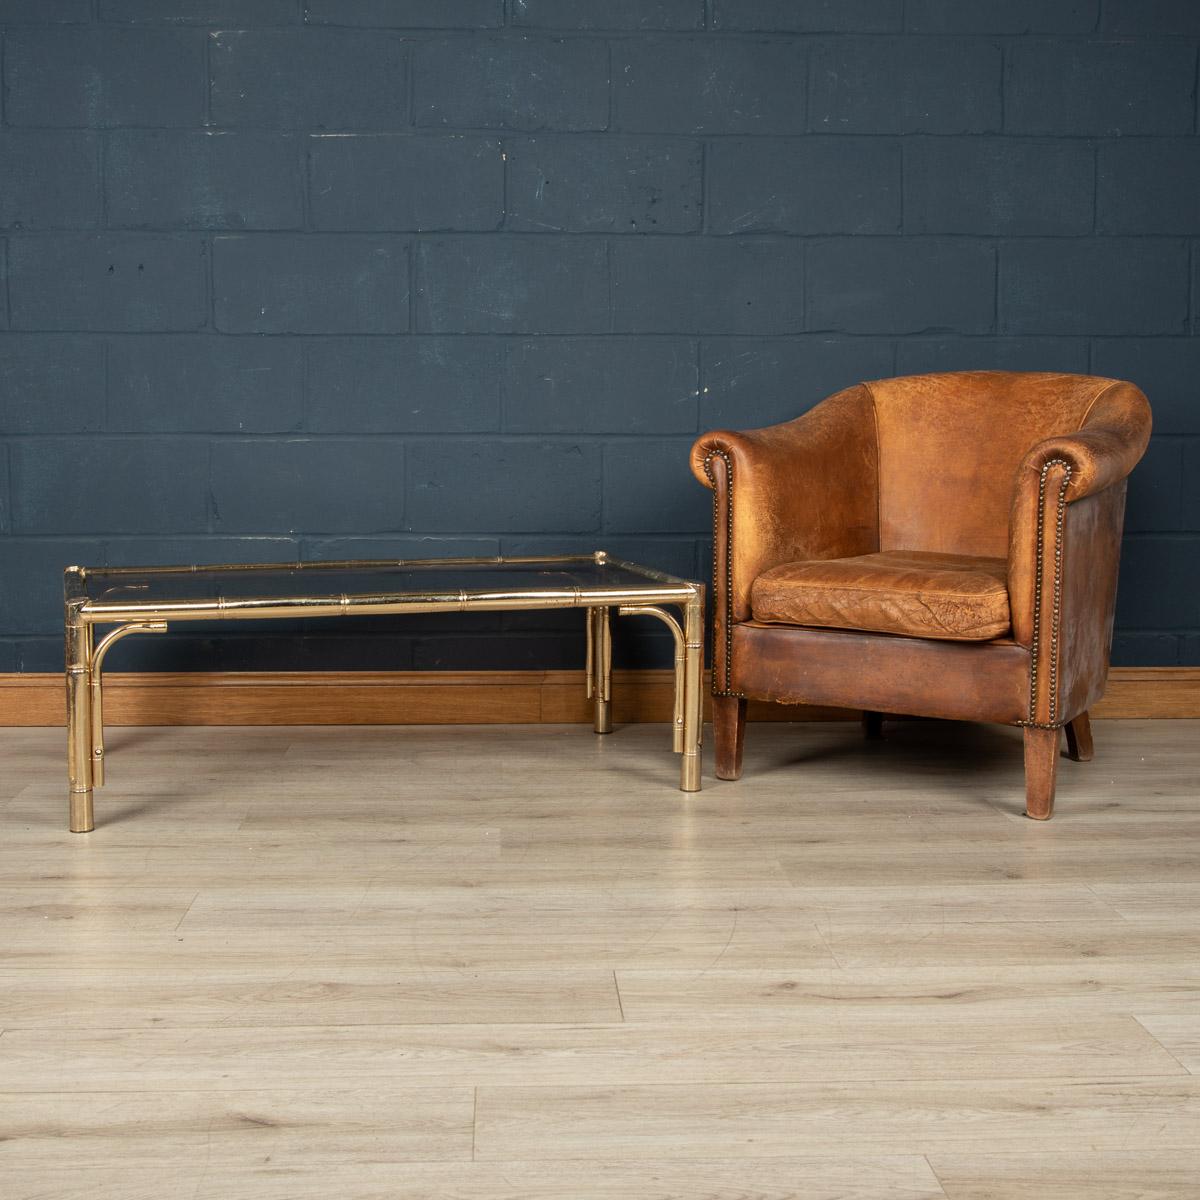 A large coffee table attributed to Maison Jansen, made in France around the 1970s. The faux bamboo frame made out of brass supporting smoked glass. A truly elegant solution for any interior looking to enrich the room with a little vintage class of